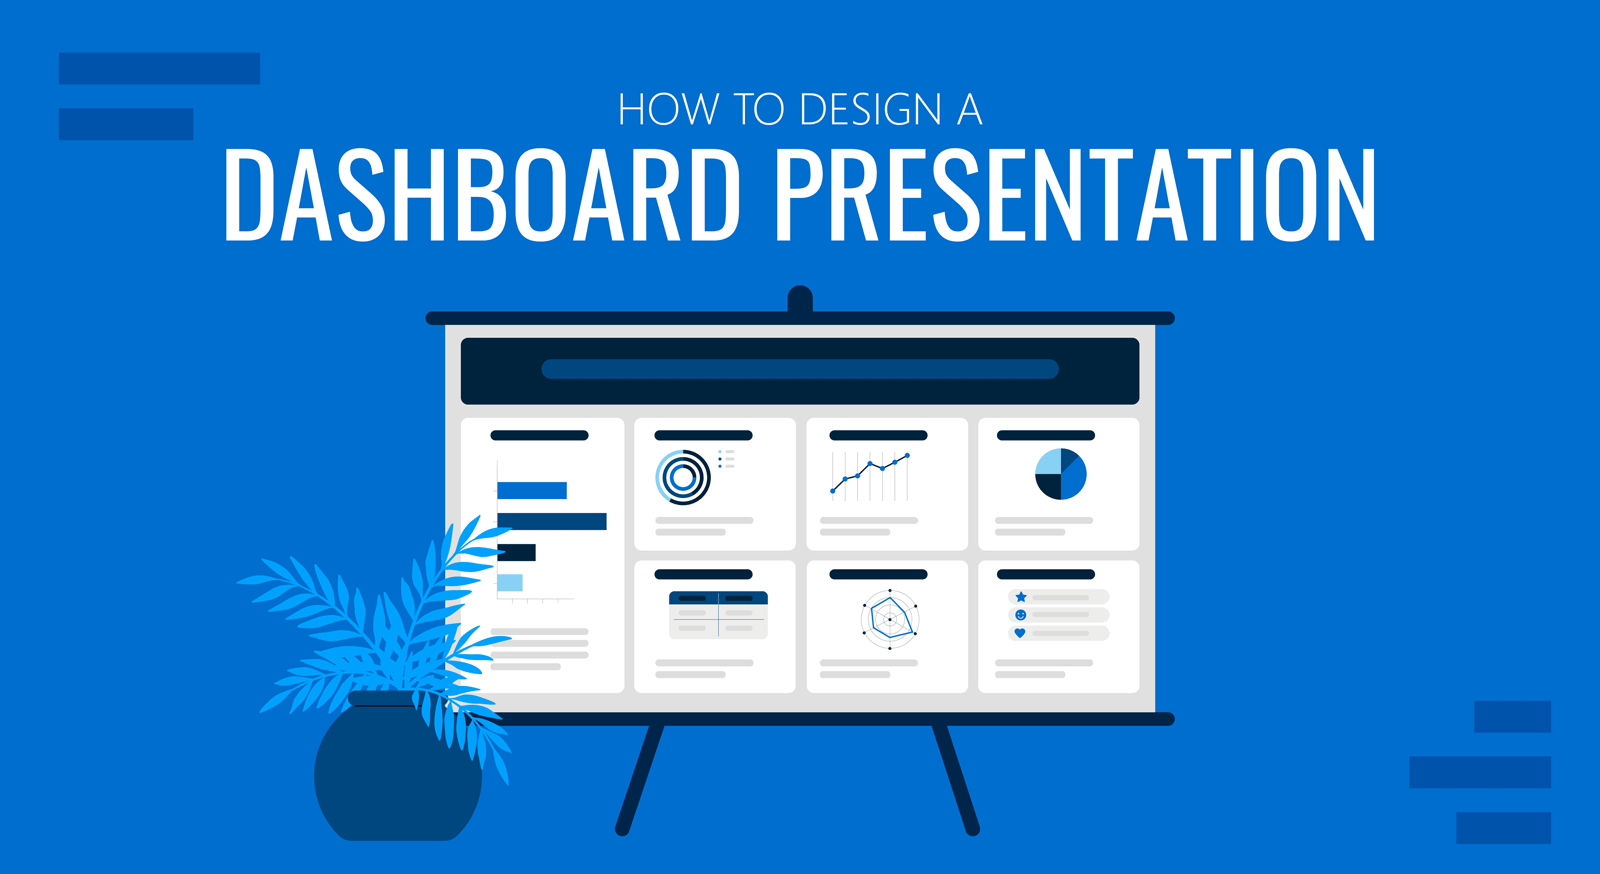 How to Design a Dashboard Presentation: A Step-by-Step Guide